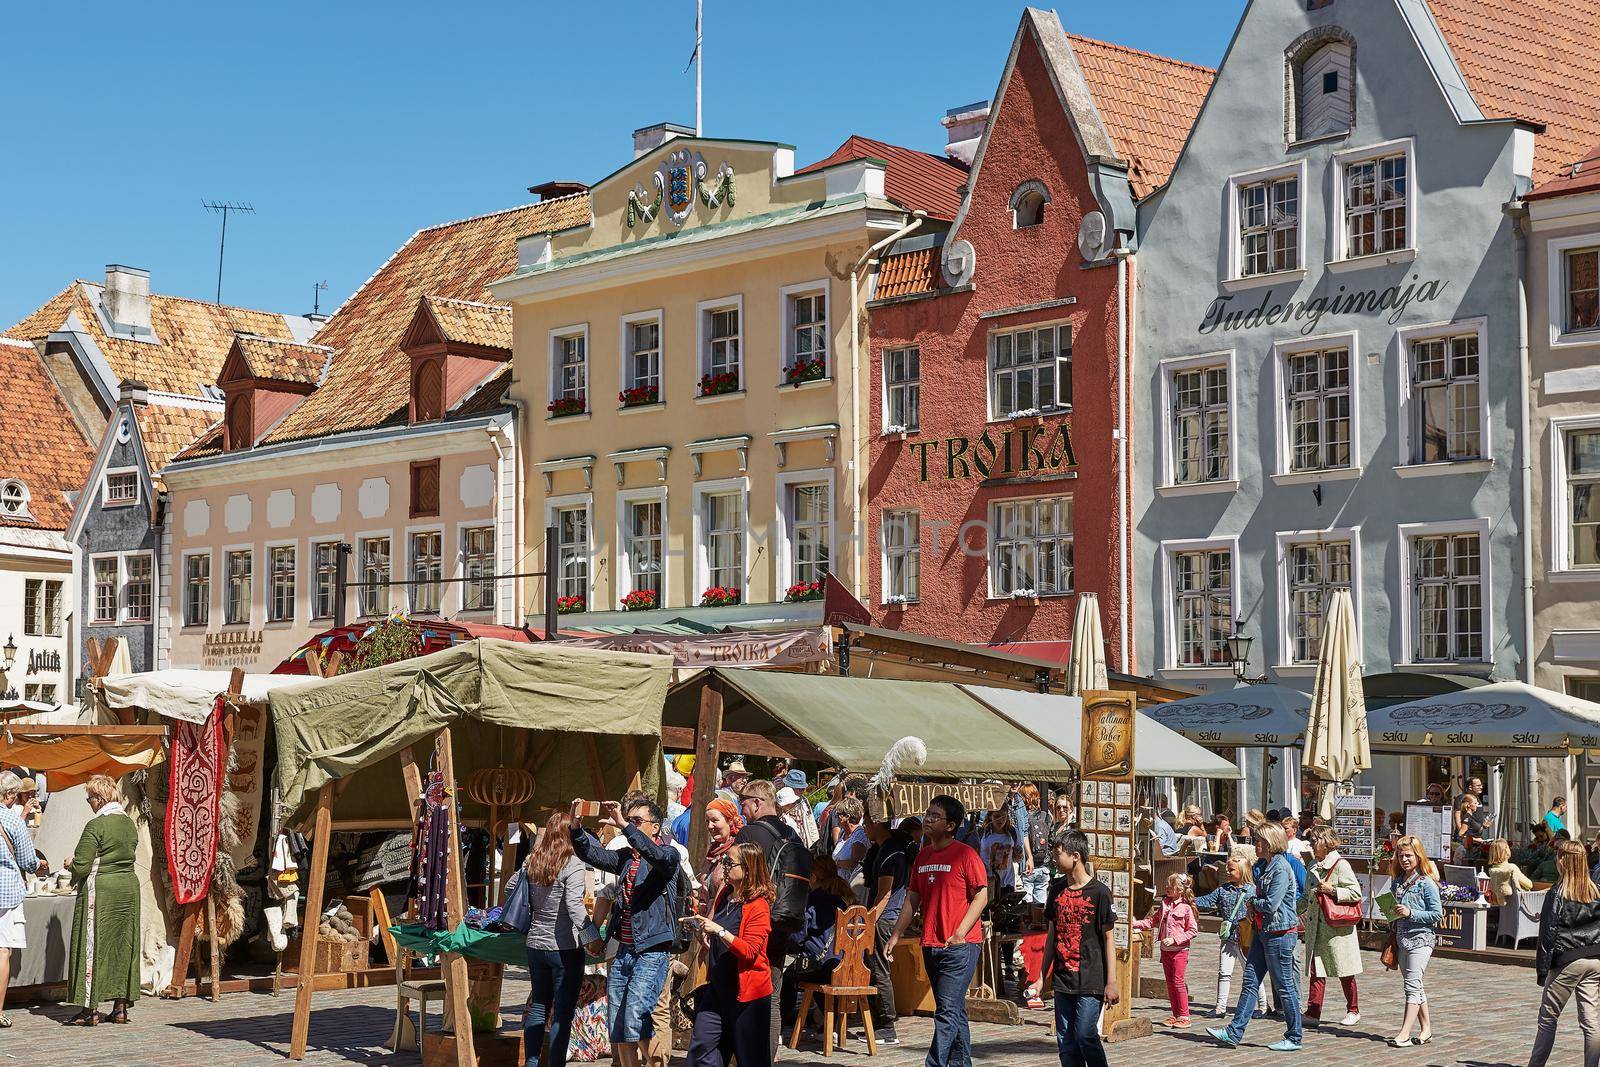 Tourists crowd enjoying shopping at the medieval Town Square in the walled city of Tallinn Estonia. by wondry